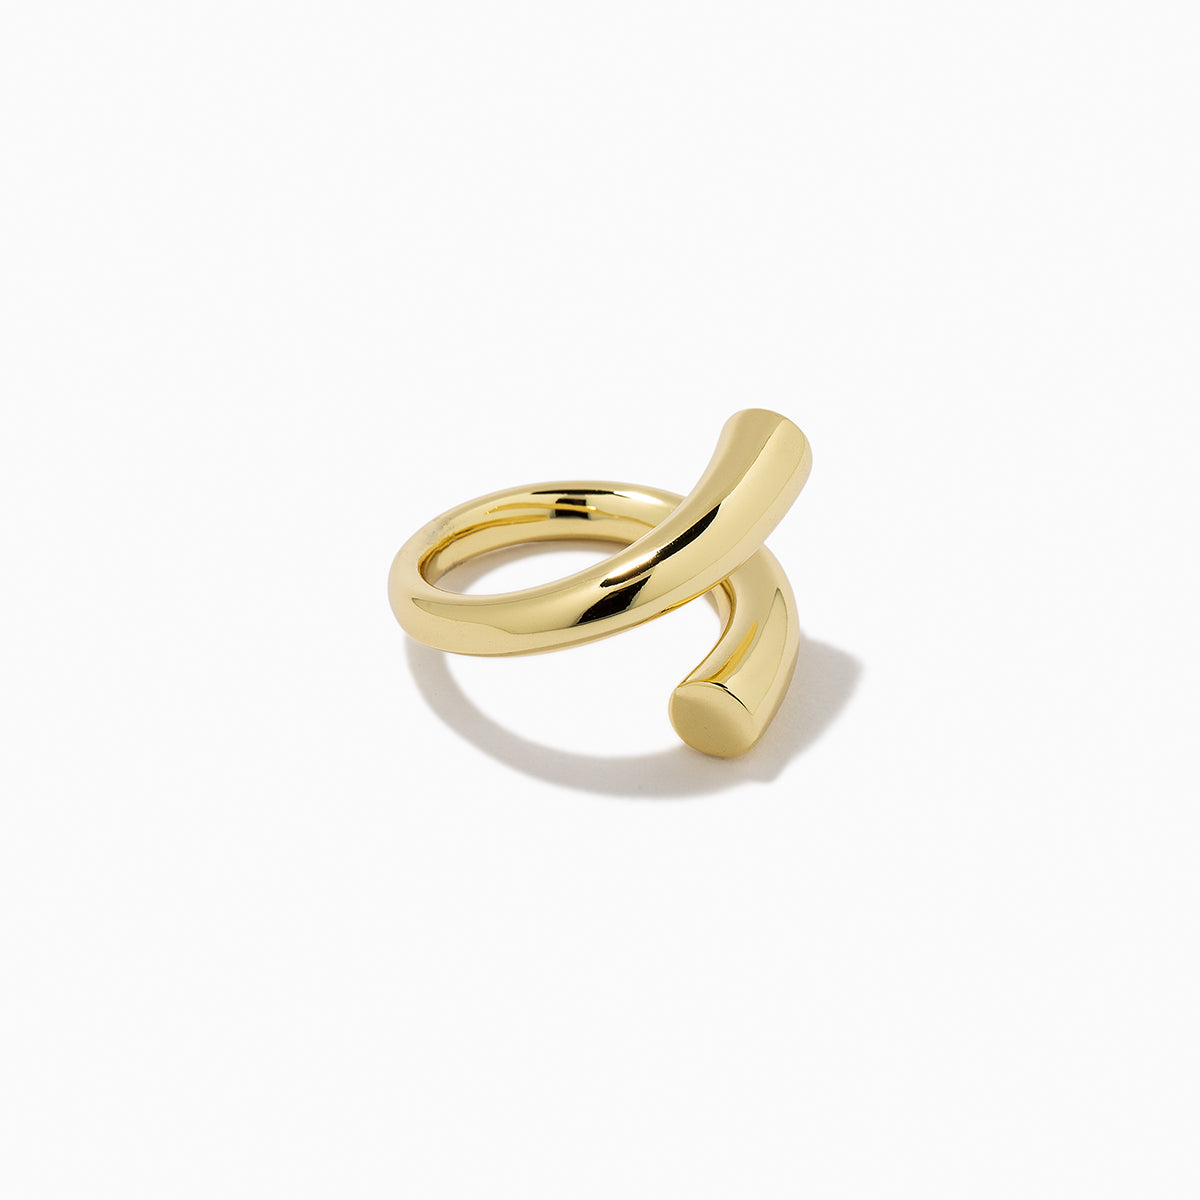 Around Town Crossover Statement Ring in Gold | Uncommon James